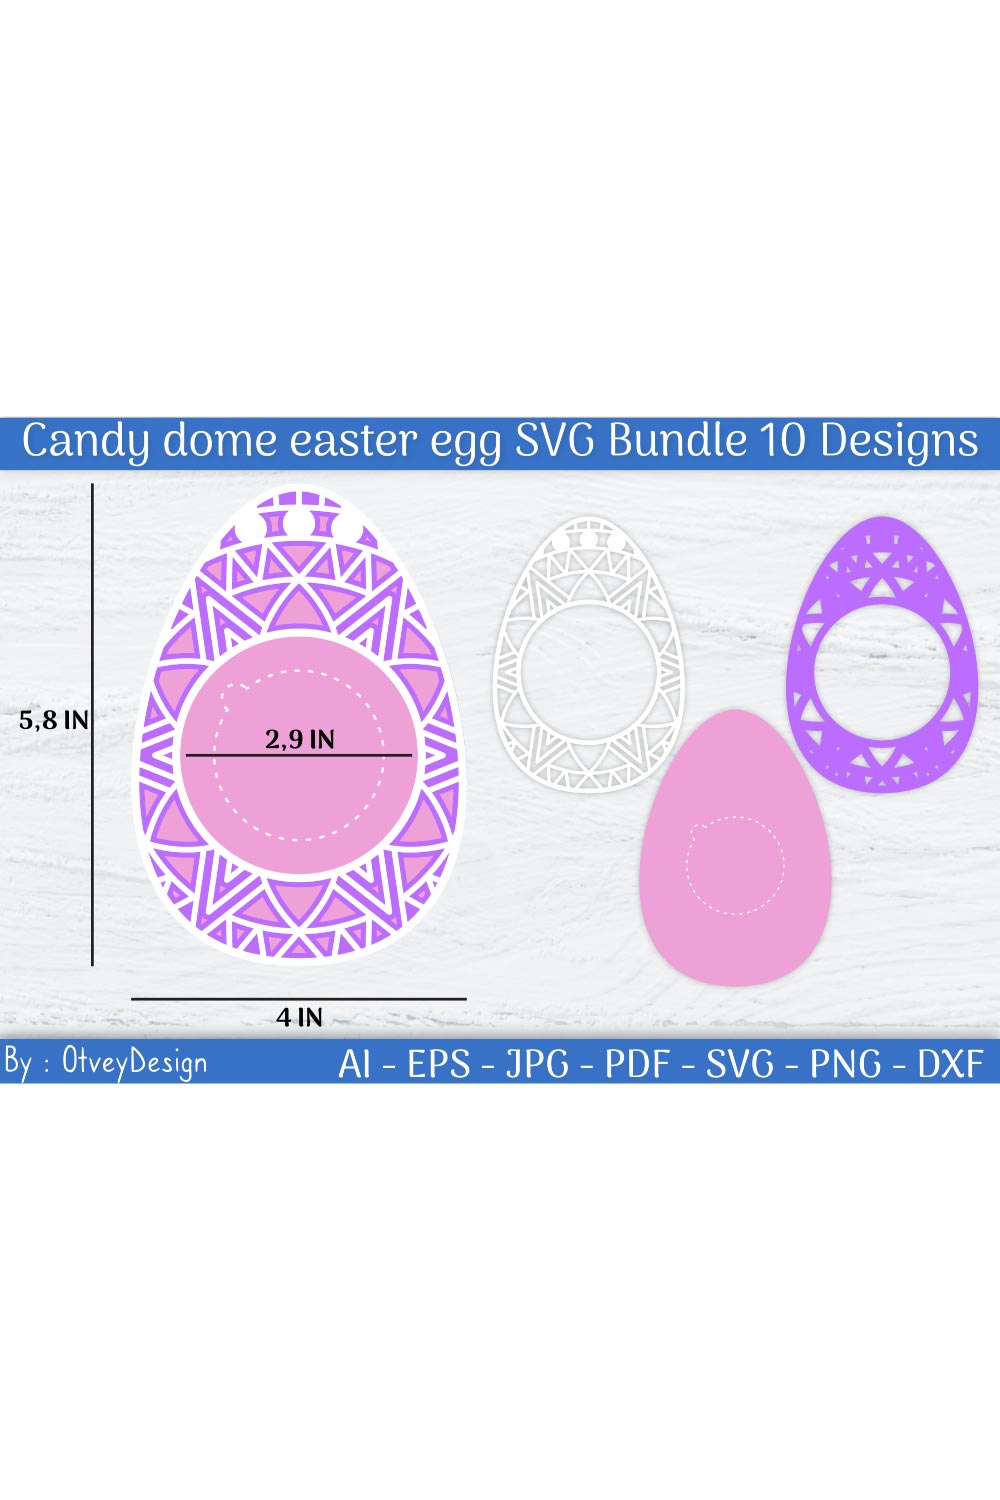 Candy dome easter egg Mandala SVG pinterest preview image.